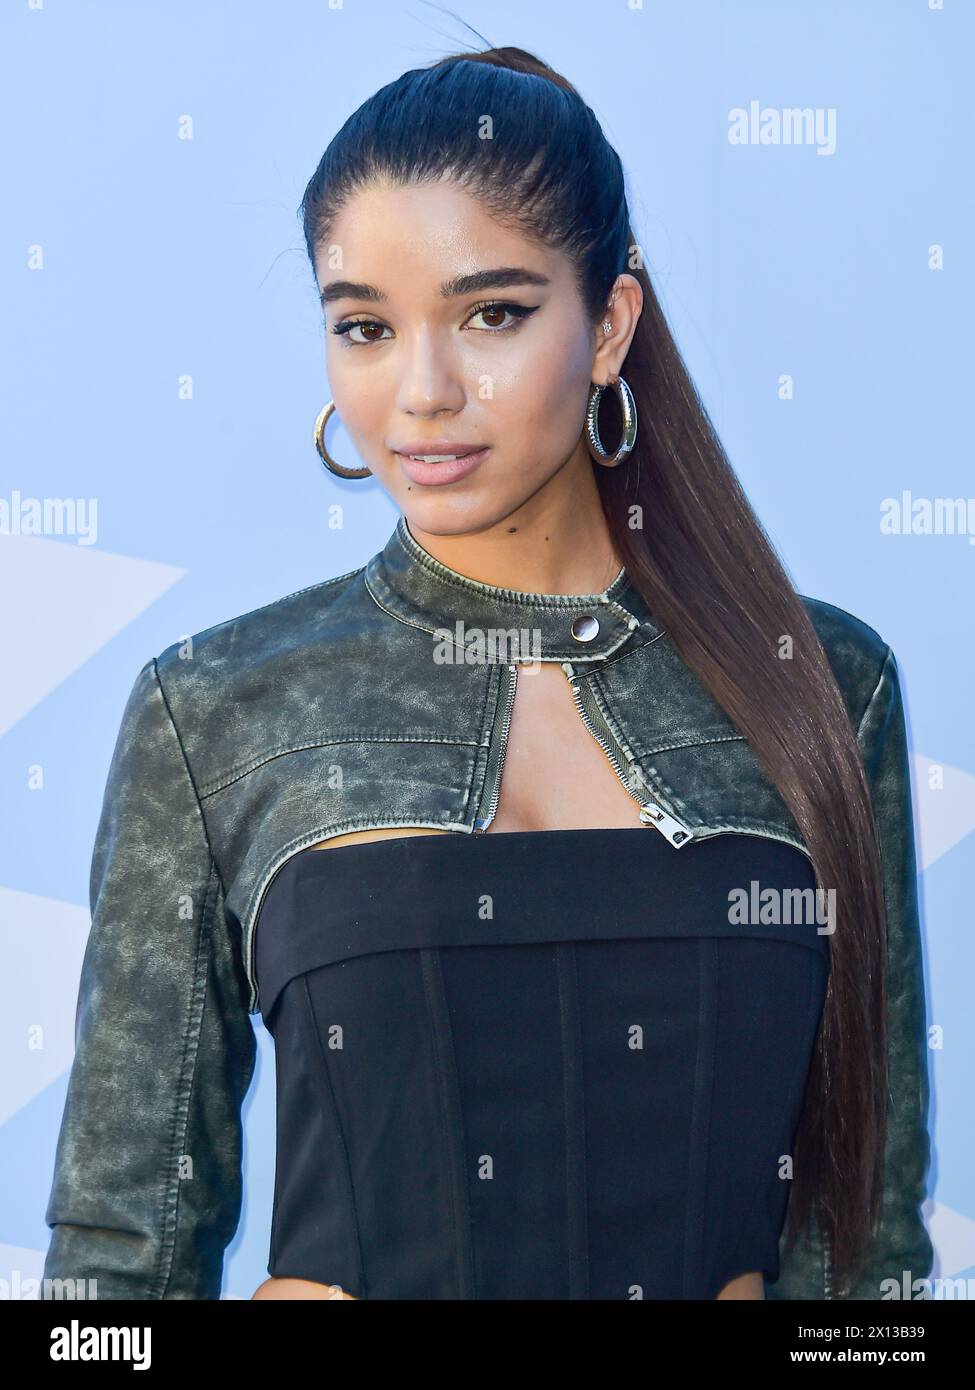 PALM SPRINGS, RIVERSIDE COUNTY, CALIFORNIA, USA - APRIL 13: Yovanna Ventura arrives at the 7th Annual REVOLVE Festival 2024 during the 2024 Coachella Valley Music And Arts Festival - Weekend 1 - Day 2 held at the Parker Palm Springs Hotel on April 13, 2024 in Palm Springs, Riverside County, California, United States. (Photo by Image Press Agency) Stock Photo